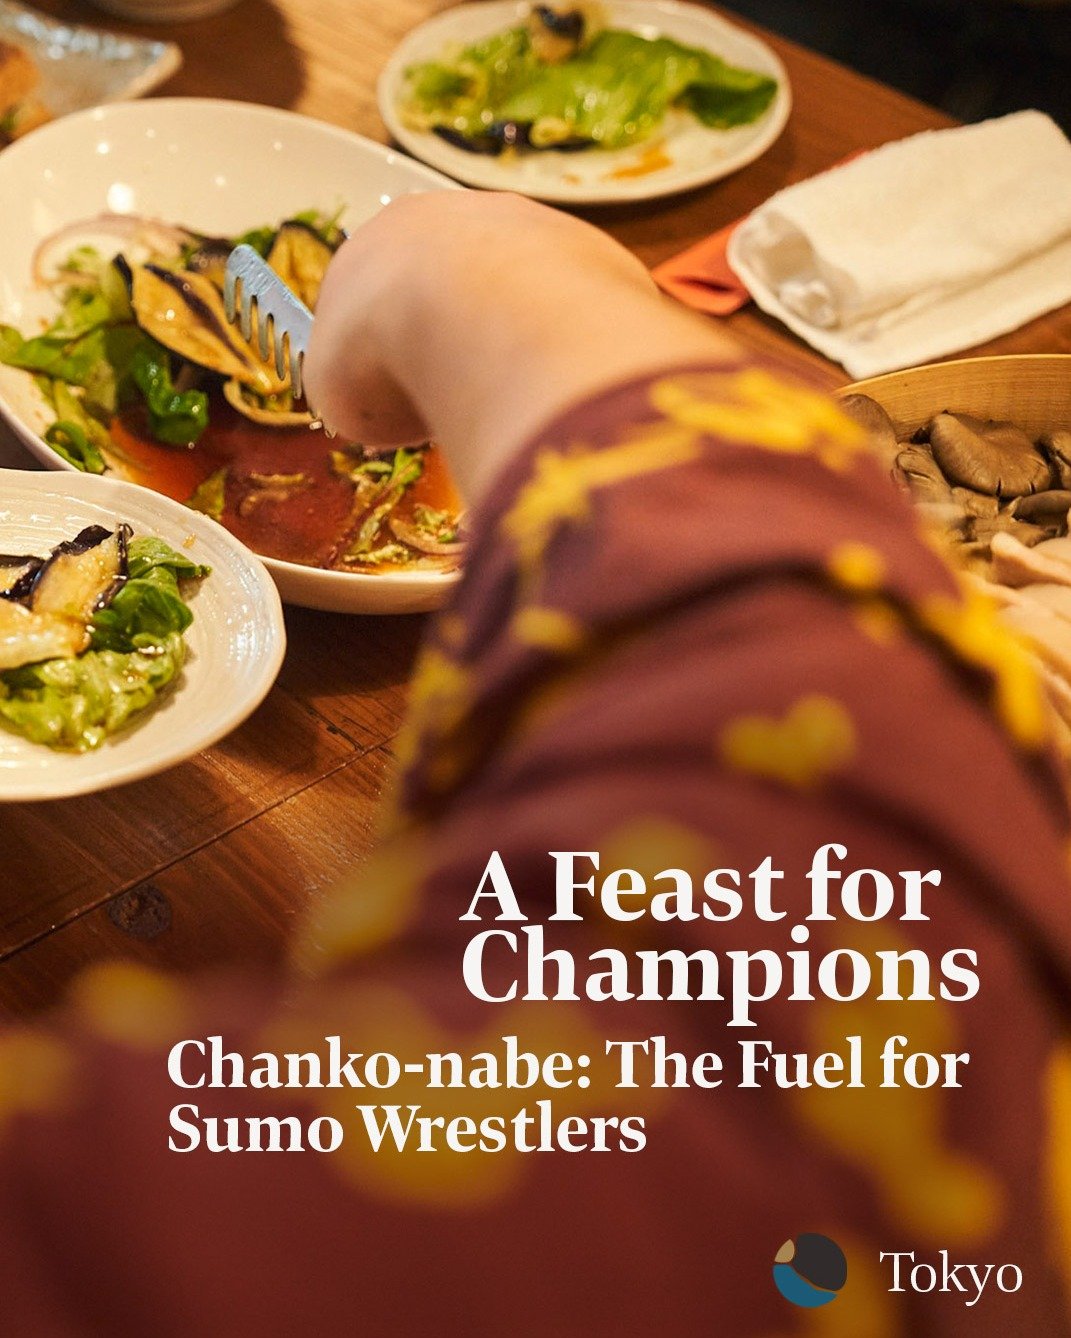 A simmering stew, overflowing with vegetables, protein, and packed with all the nutrients necessary to fuel these impressive fighters, chanko nabe is the traditional meal of sumo champions. 

Since each rikishi must undergo hours of training in a sin